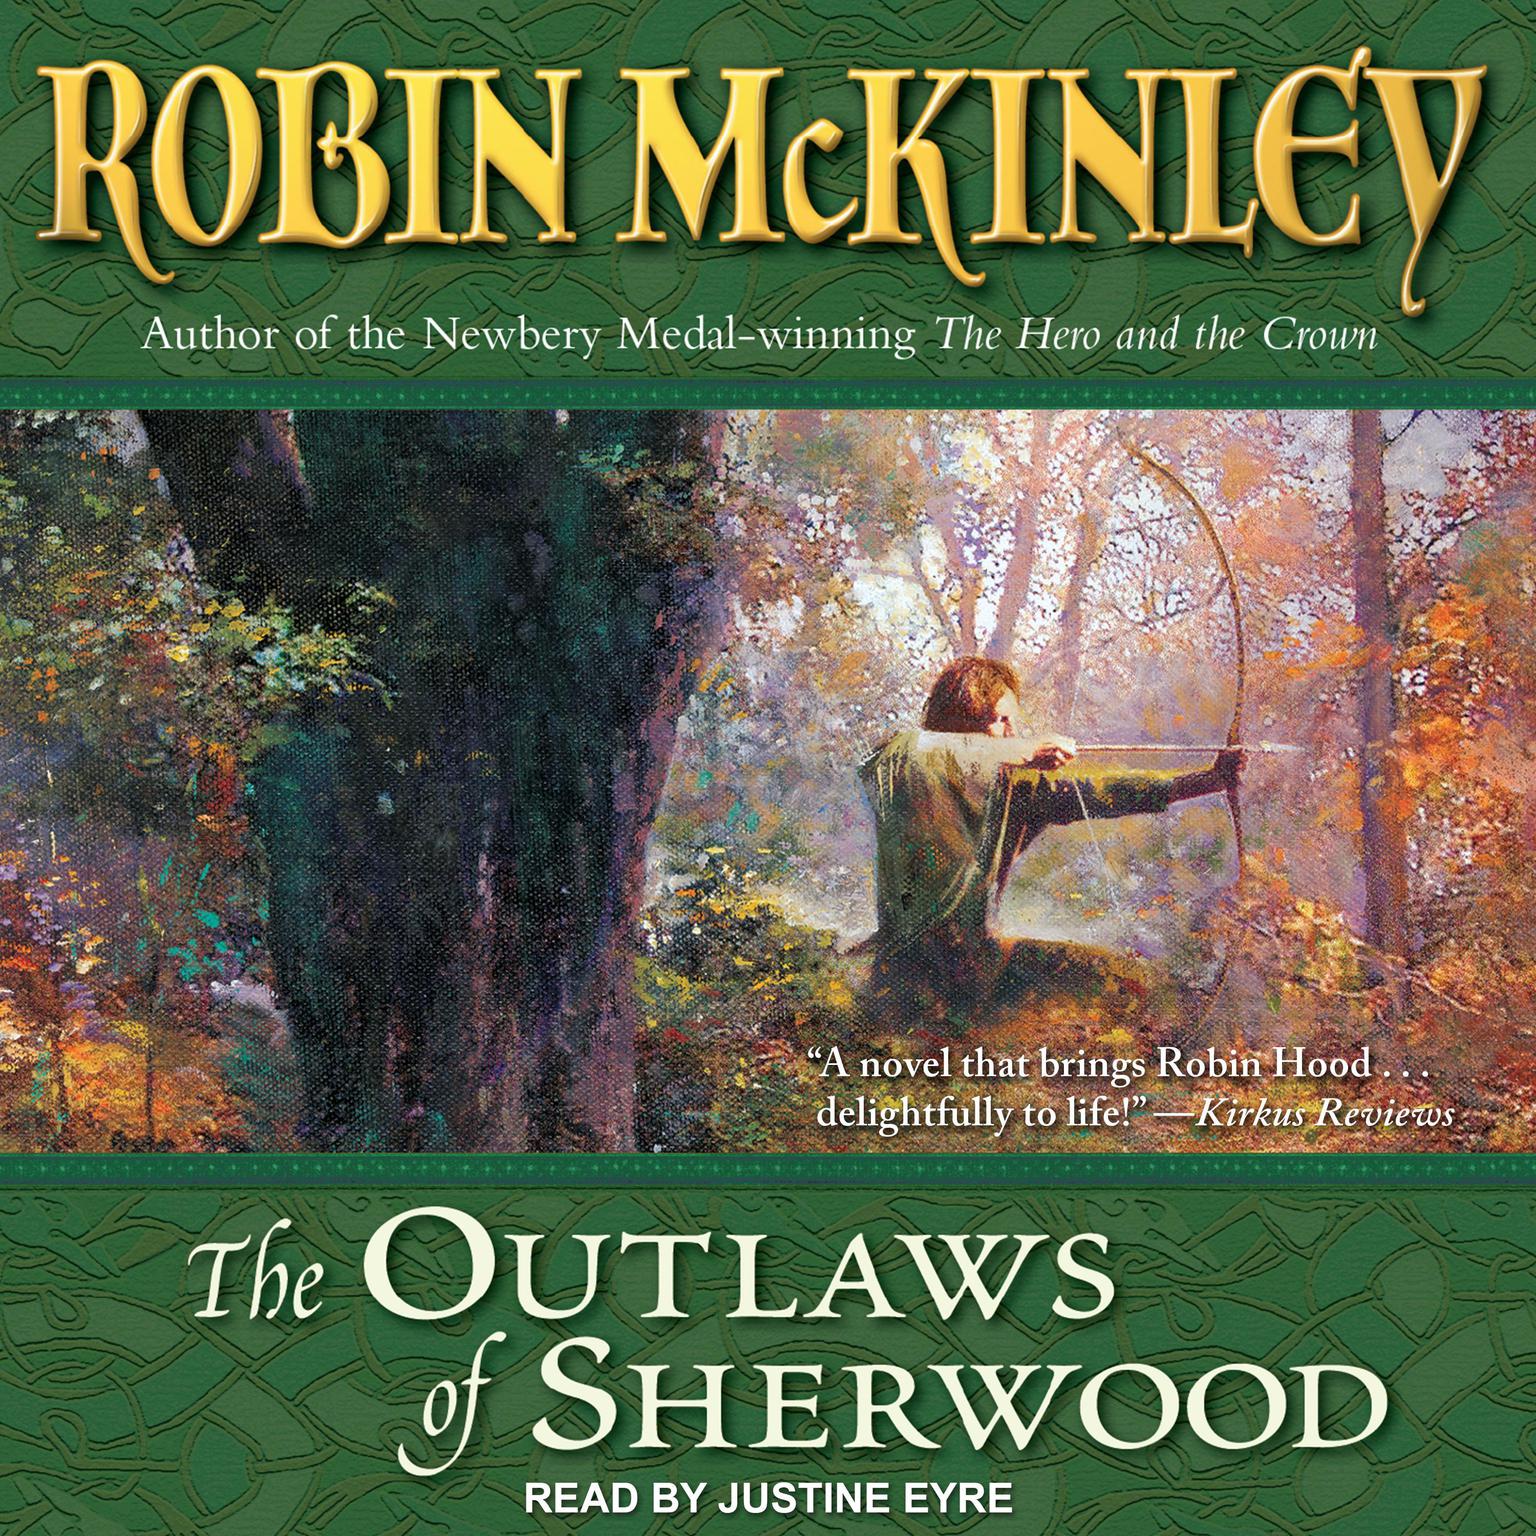 Robin McKinley: The outlaws of Sherwood (1989, Berkley Pub. Group)